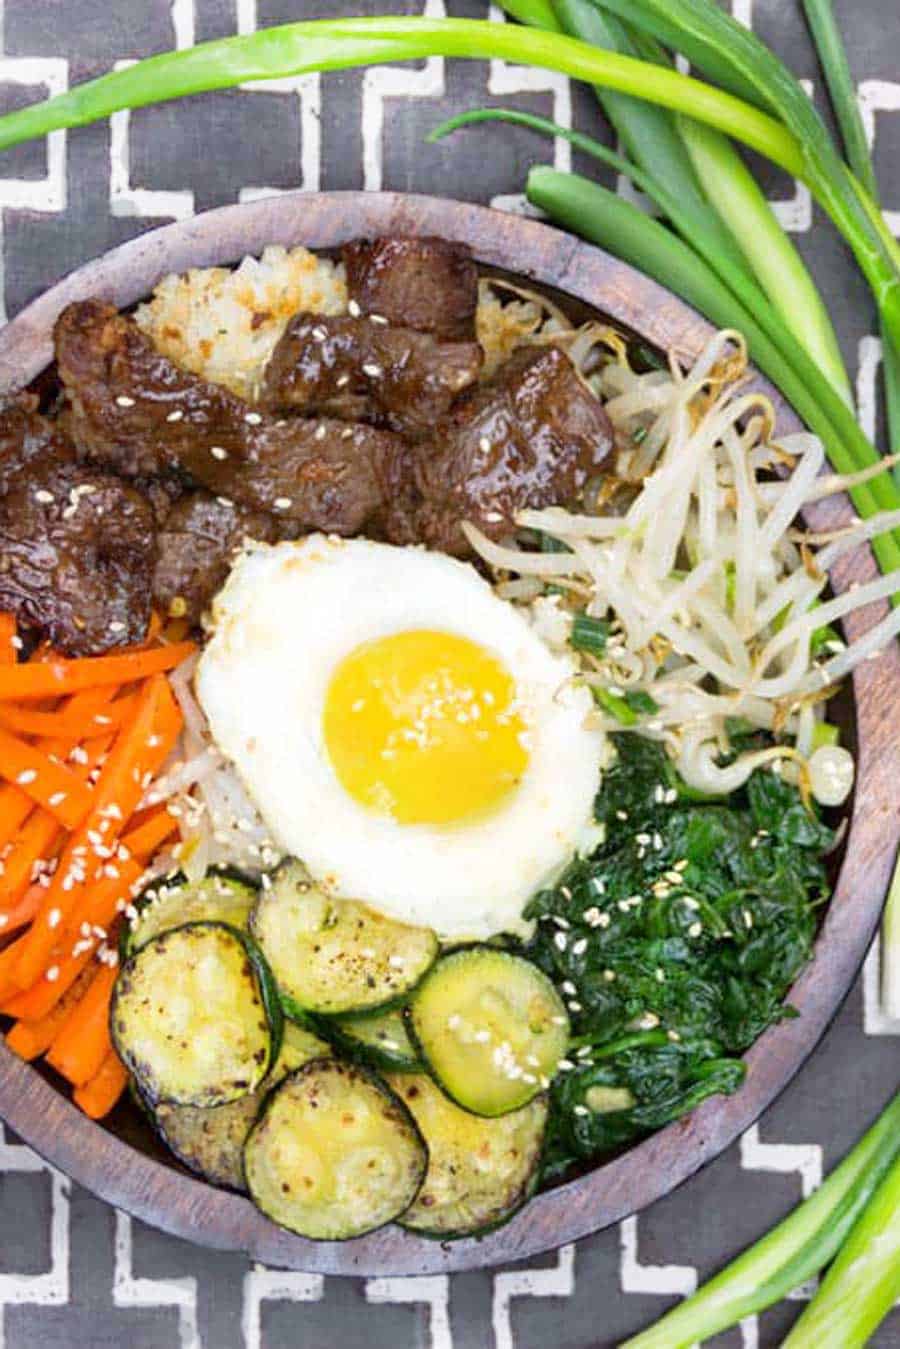 bibimbap bowl with bulgogi beef, carrots sticks, sautéed sliced zucchini, spinach, bean sprouts, and a fried egg in the middle